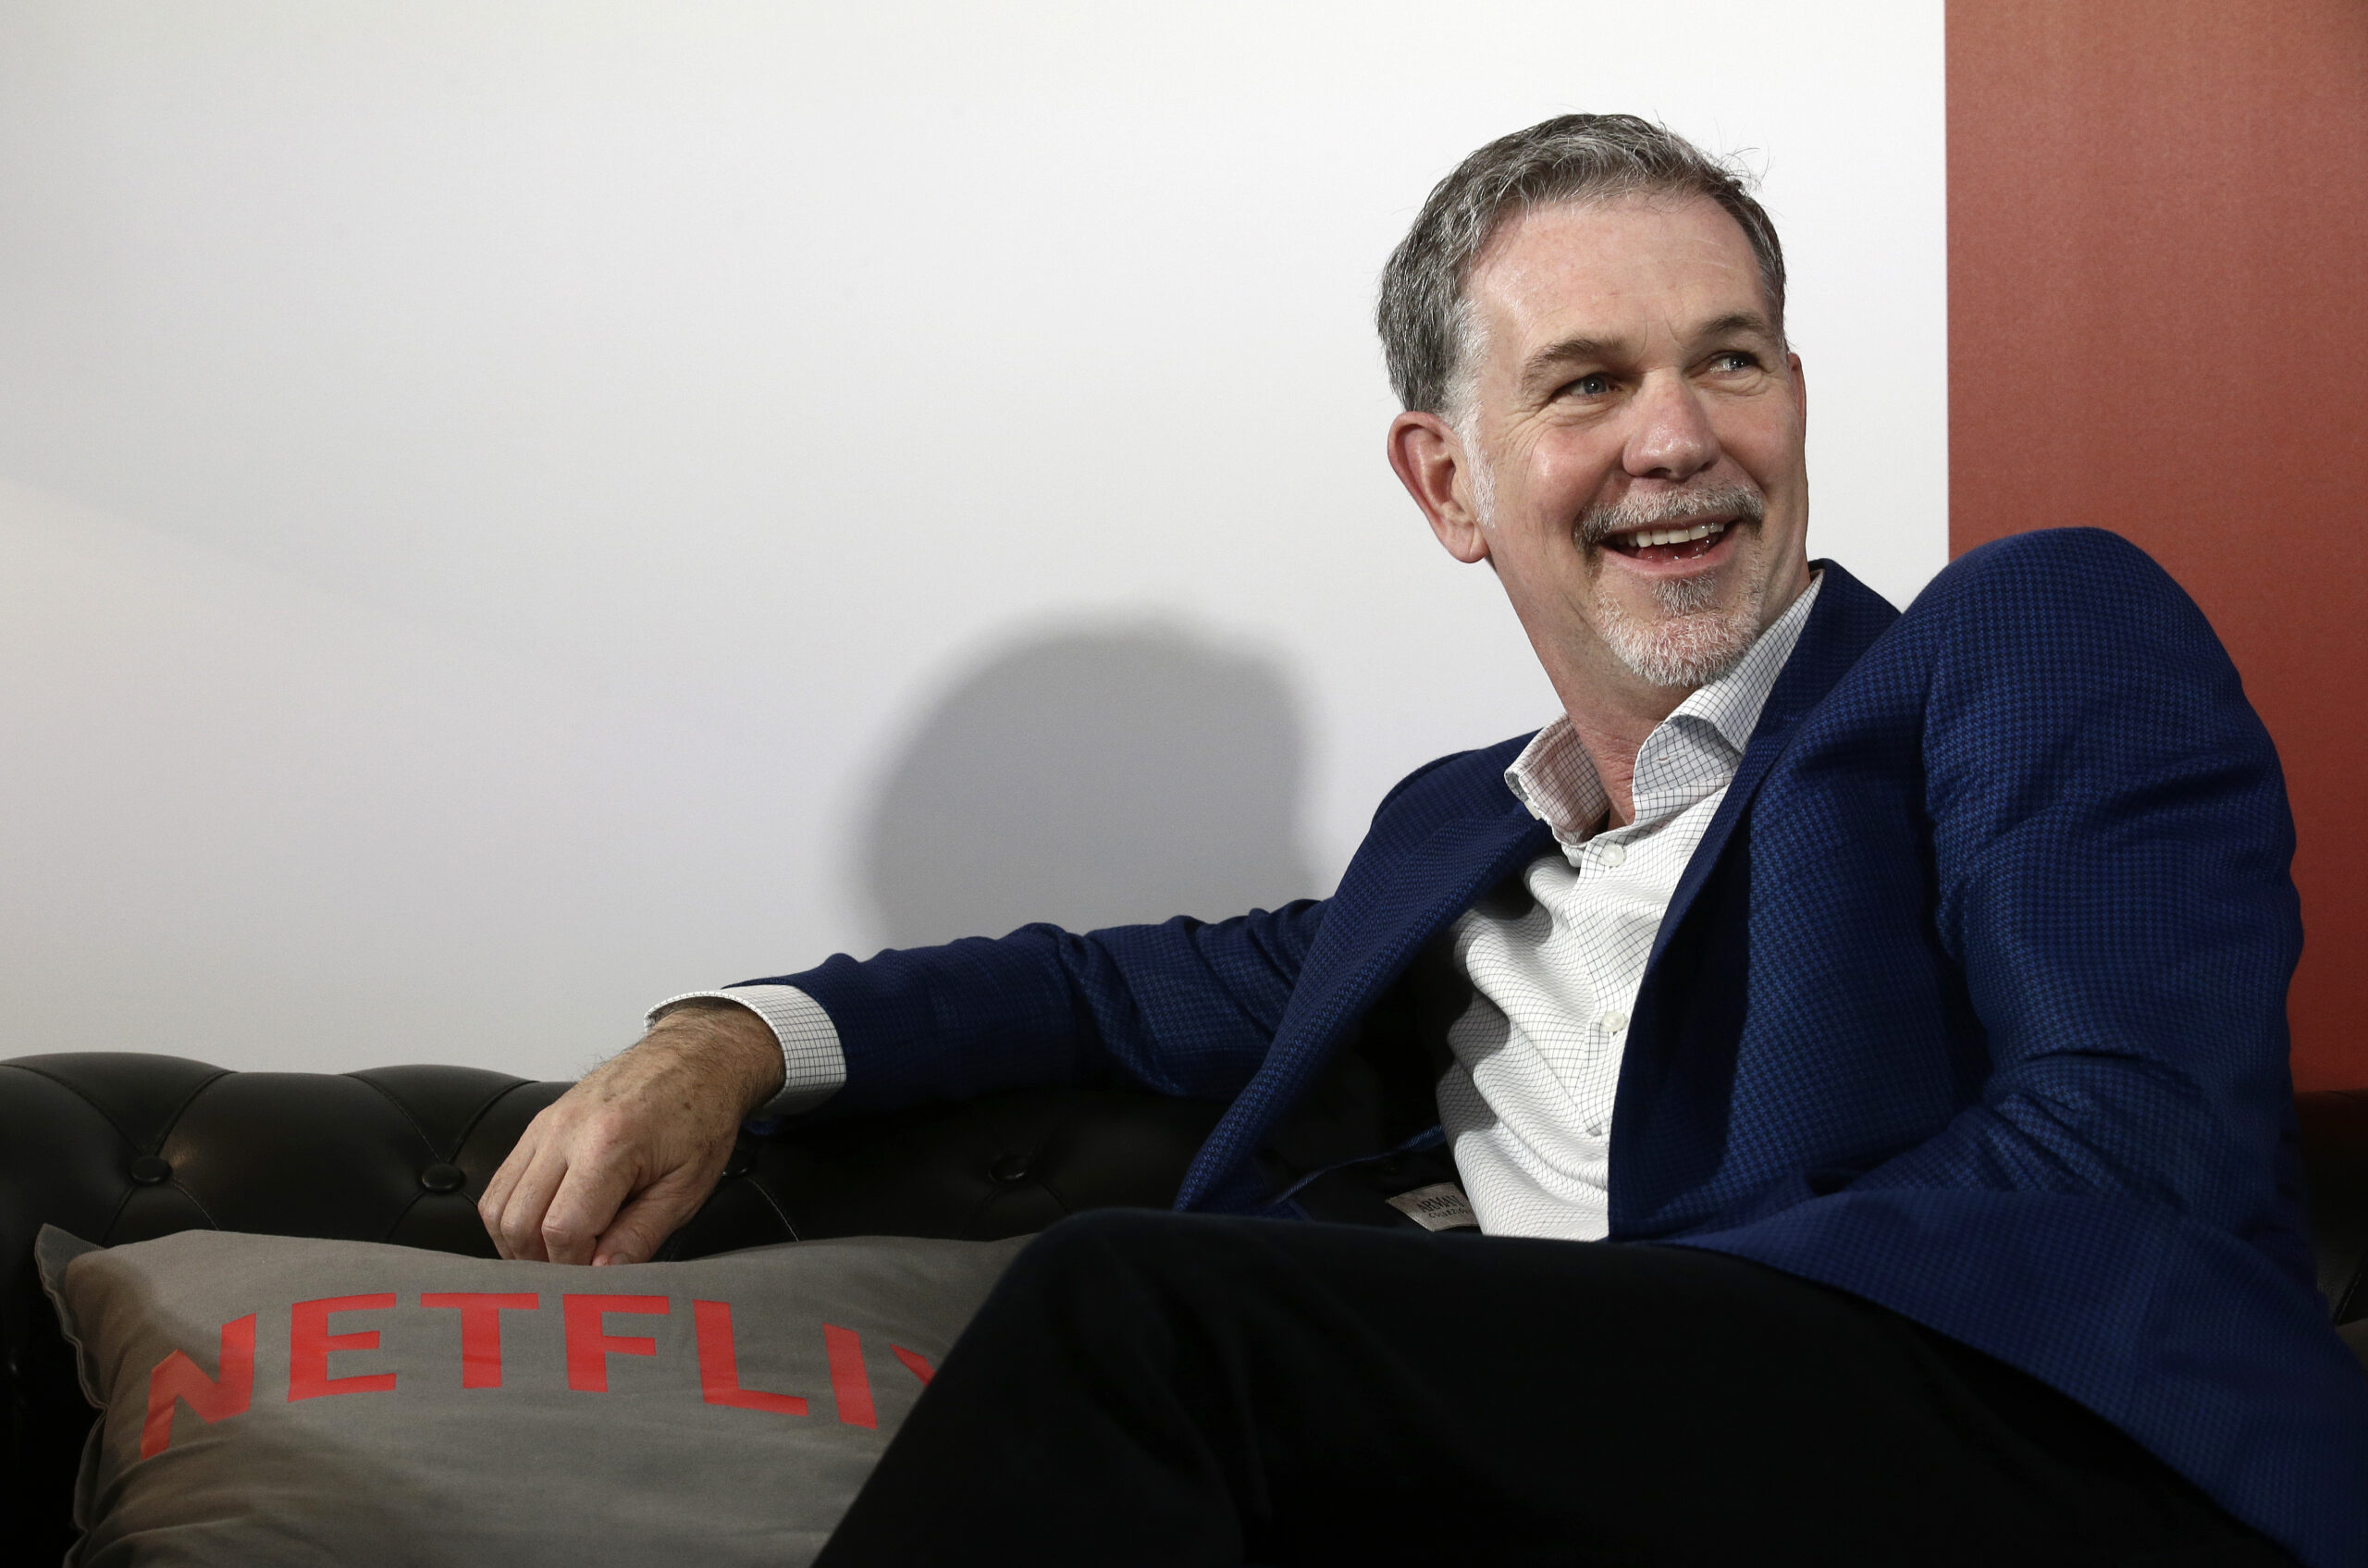 FILE - In this Feb. 28, 2017, file photo, Netflix Founder and CEO Reed Hastings smiles during an interview in Barcelona, Spain. Prominent charter school supporters are dishing out campaign money, as key gubernatorial races in several states have now begun in earnest. Hastings and philanthropist Laurene Powell Jobs donated $29,200 each, the maximum amount, to Democrat Gavin Newsom's campaign for California governor. (AP Photo/Manu Fernandez, File)